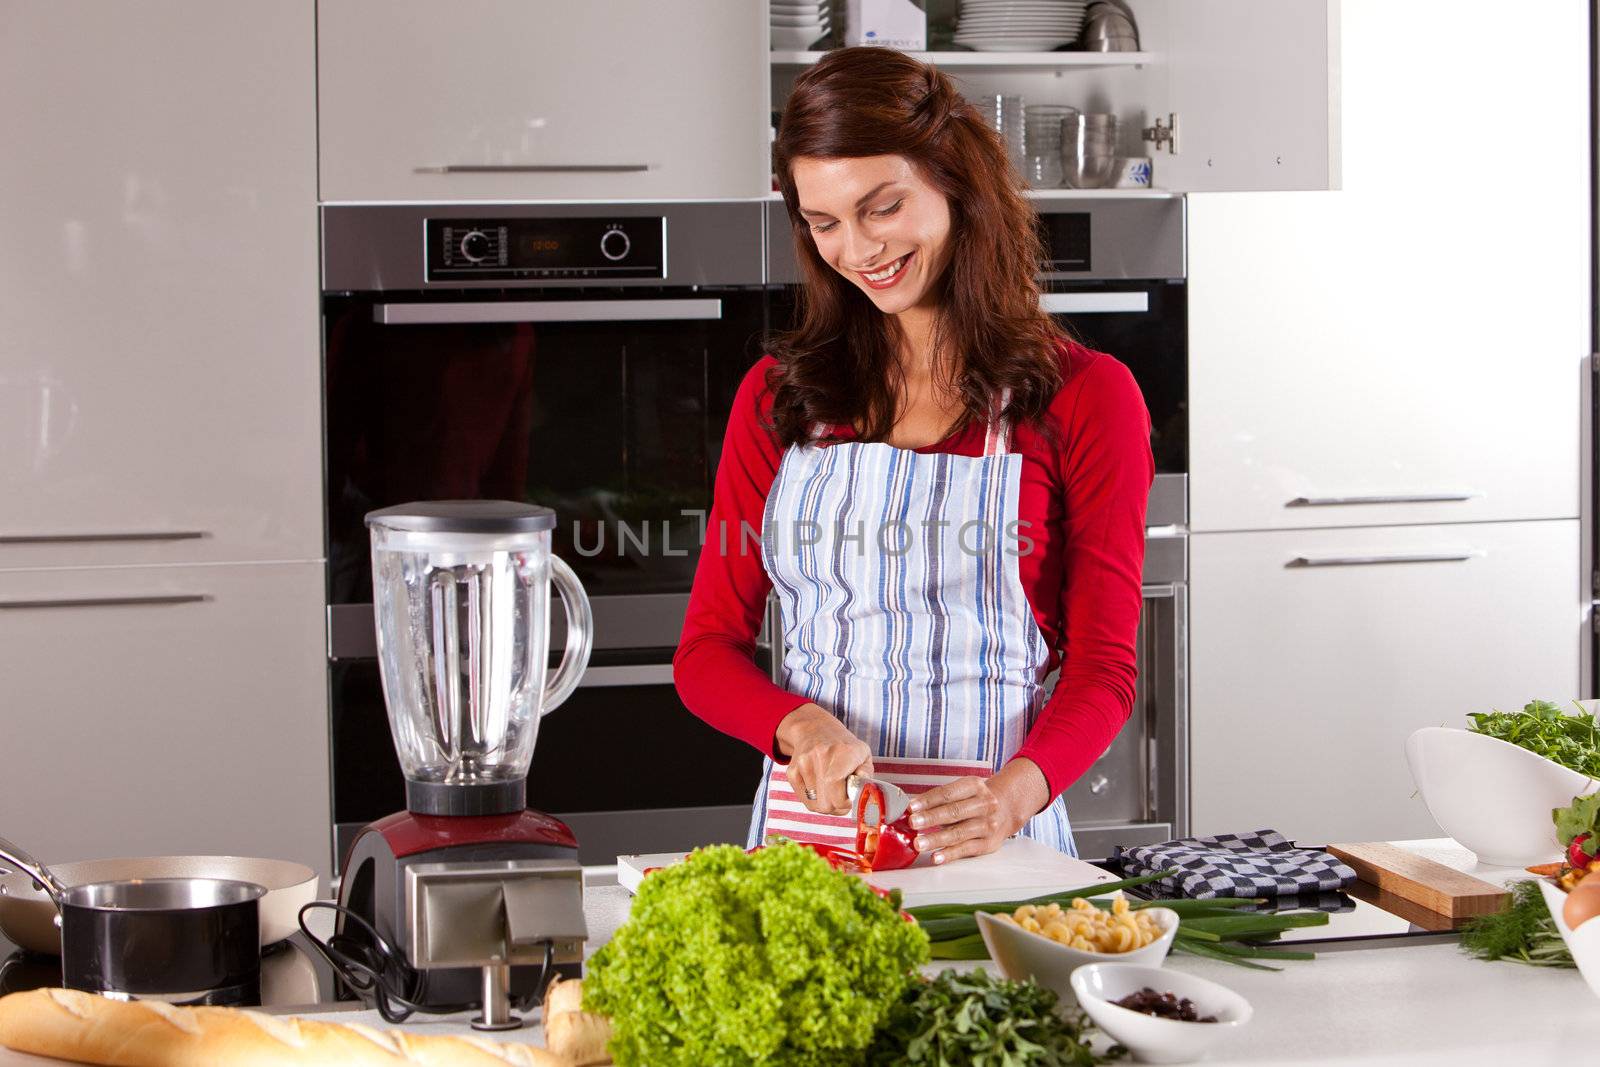 Beautiful brunette working in the kitchen cutting vegetables